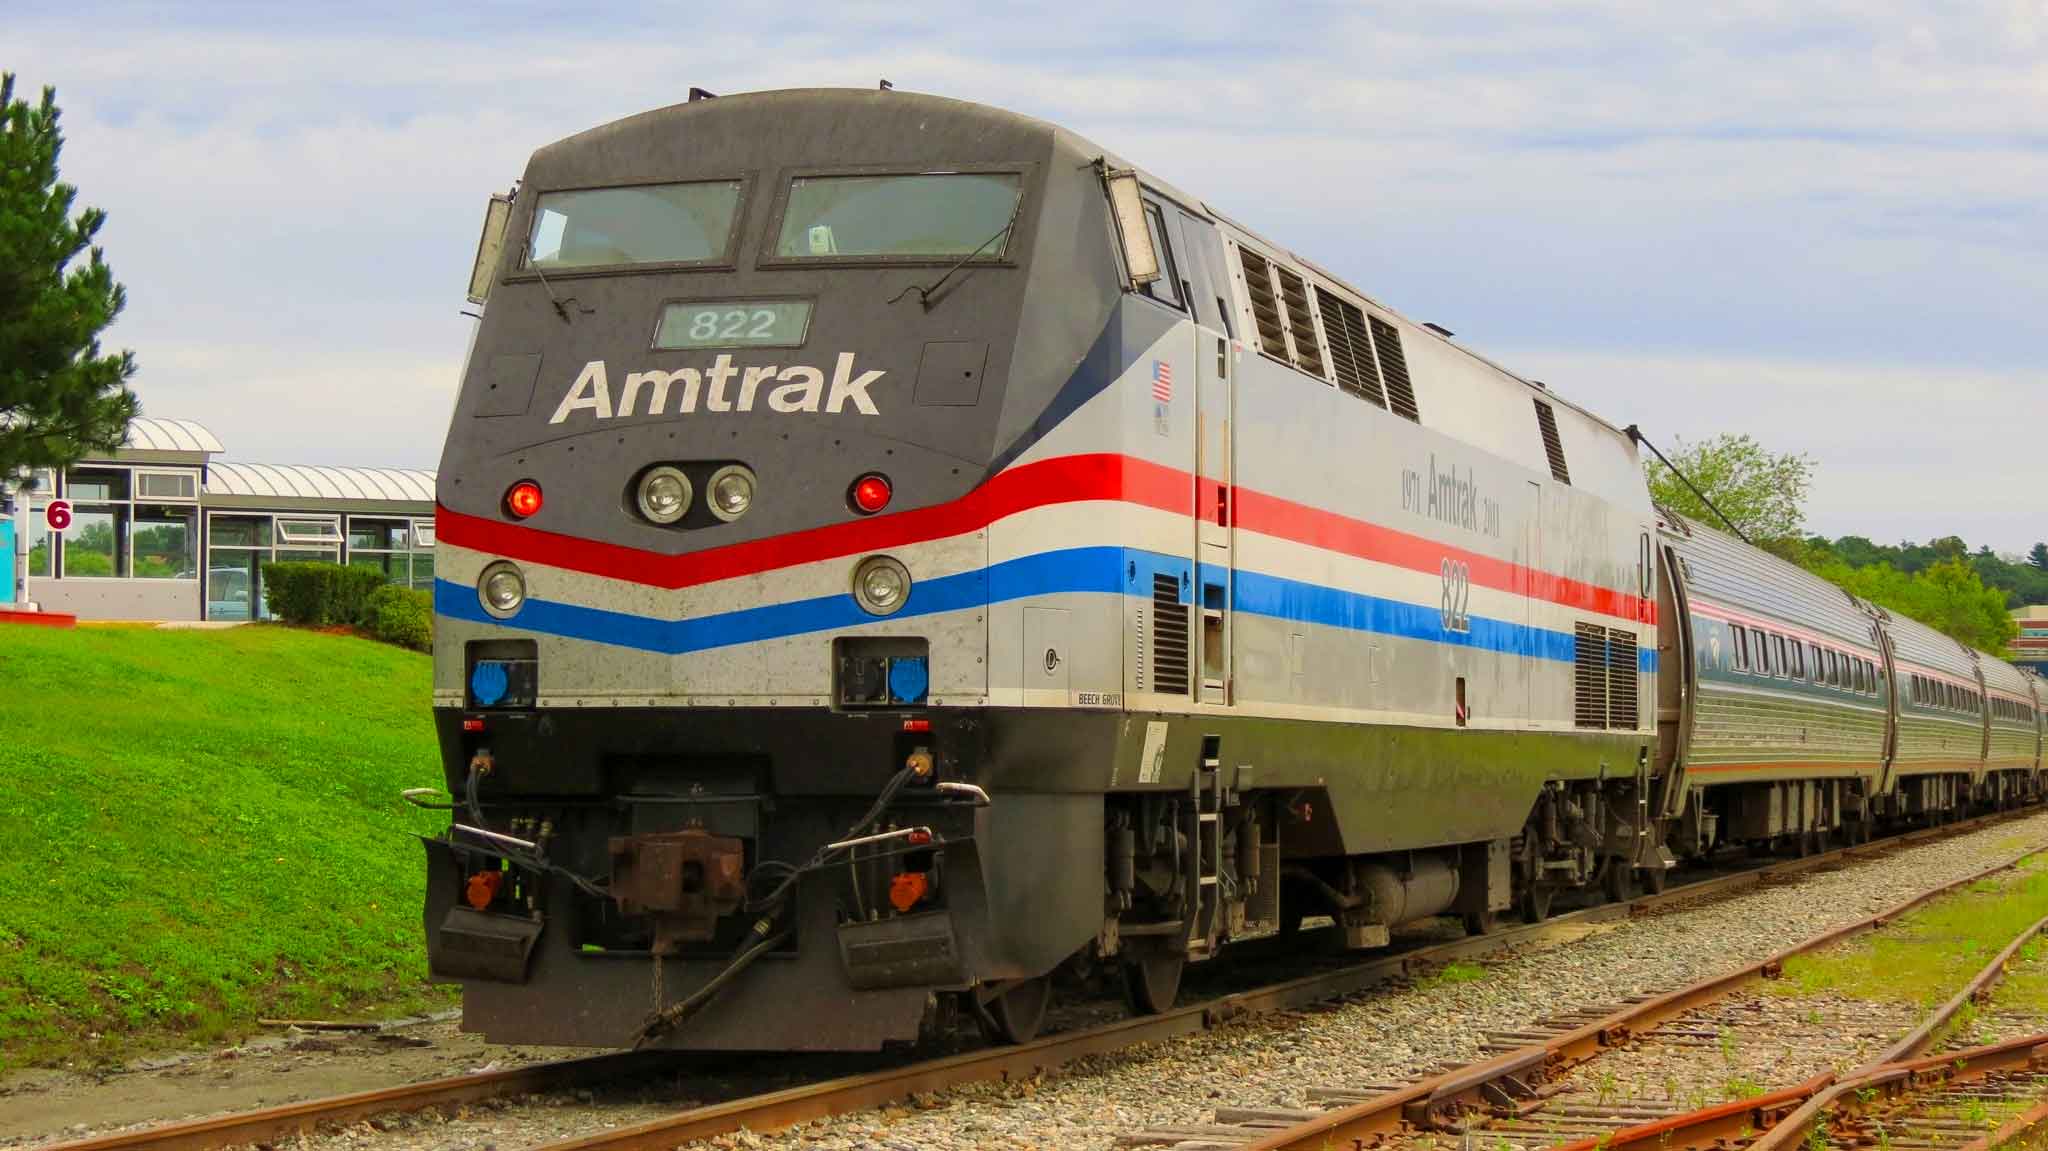 Manage Your Rail Experience On The New Amtrak App